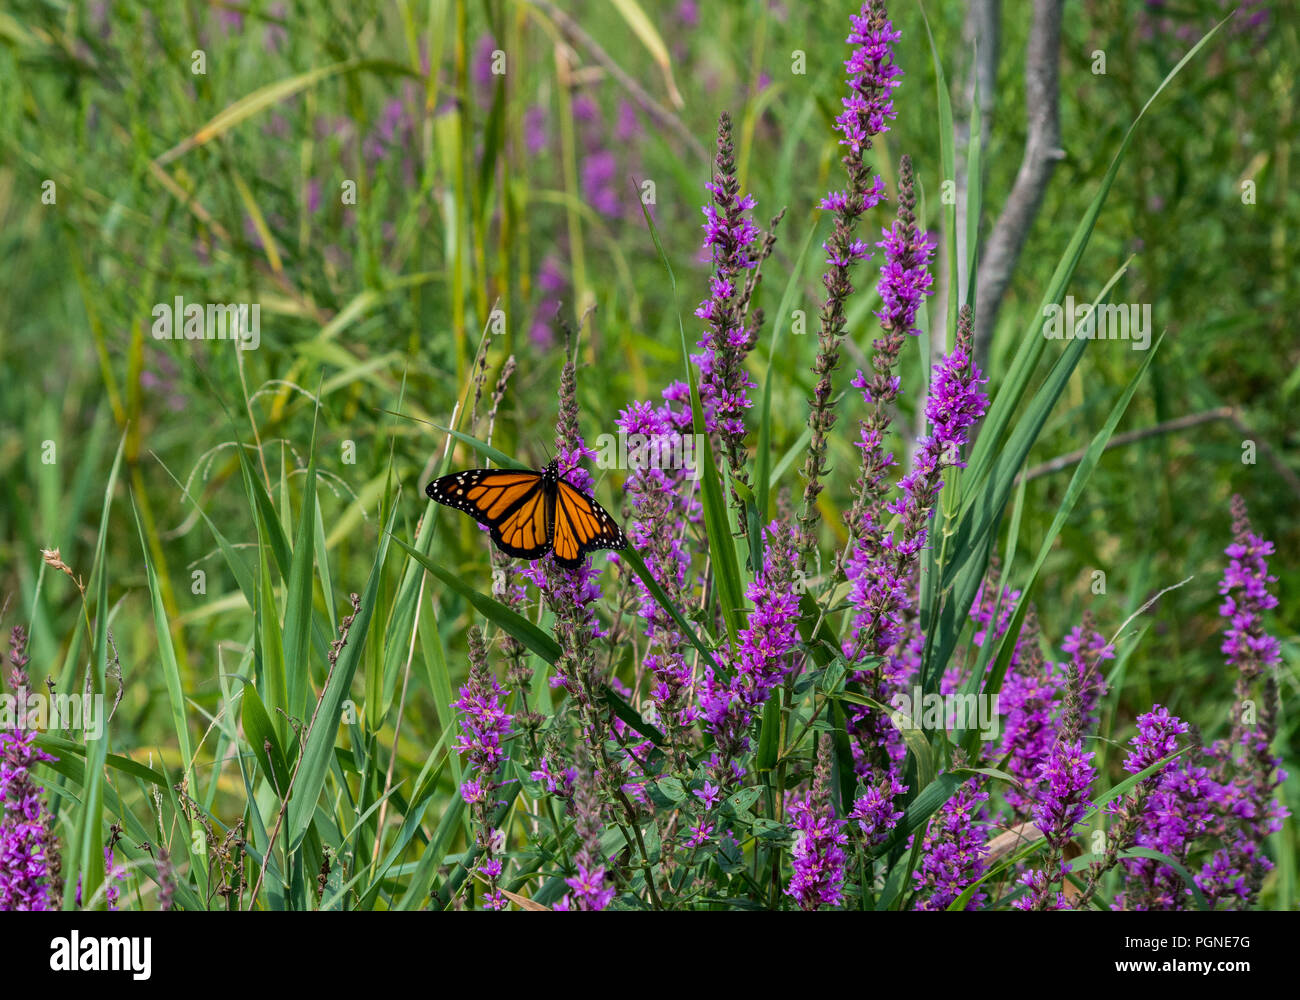 Monarch butterfly on Purple Loosestrife wildflowers Stock Photo